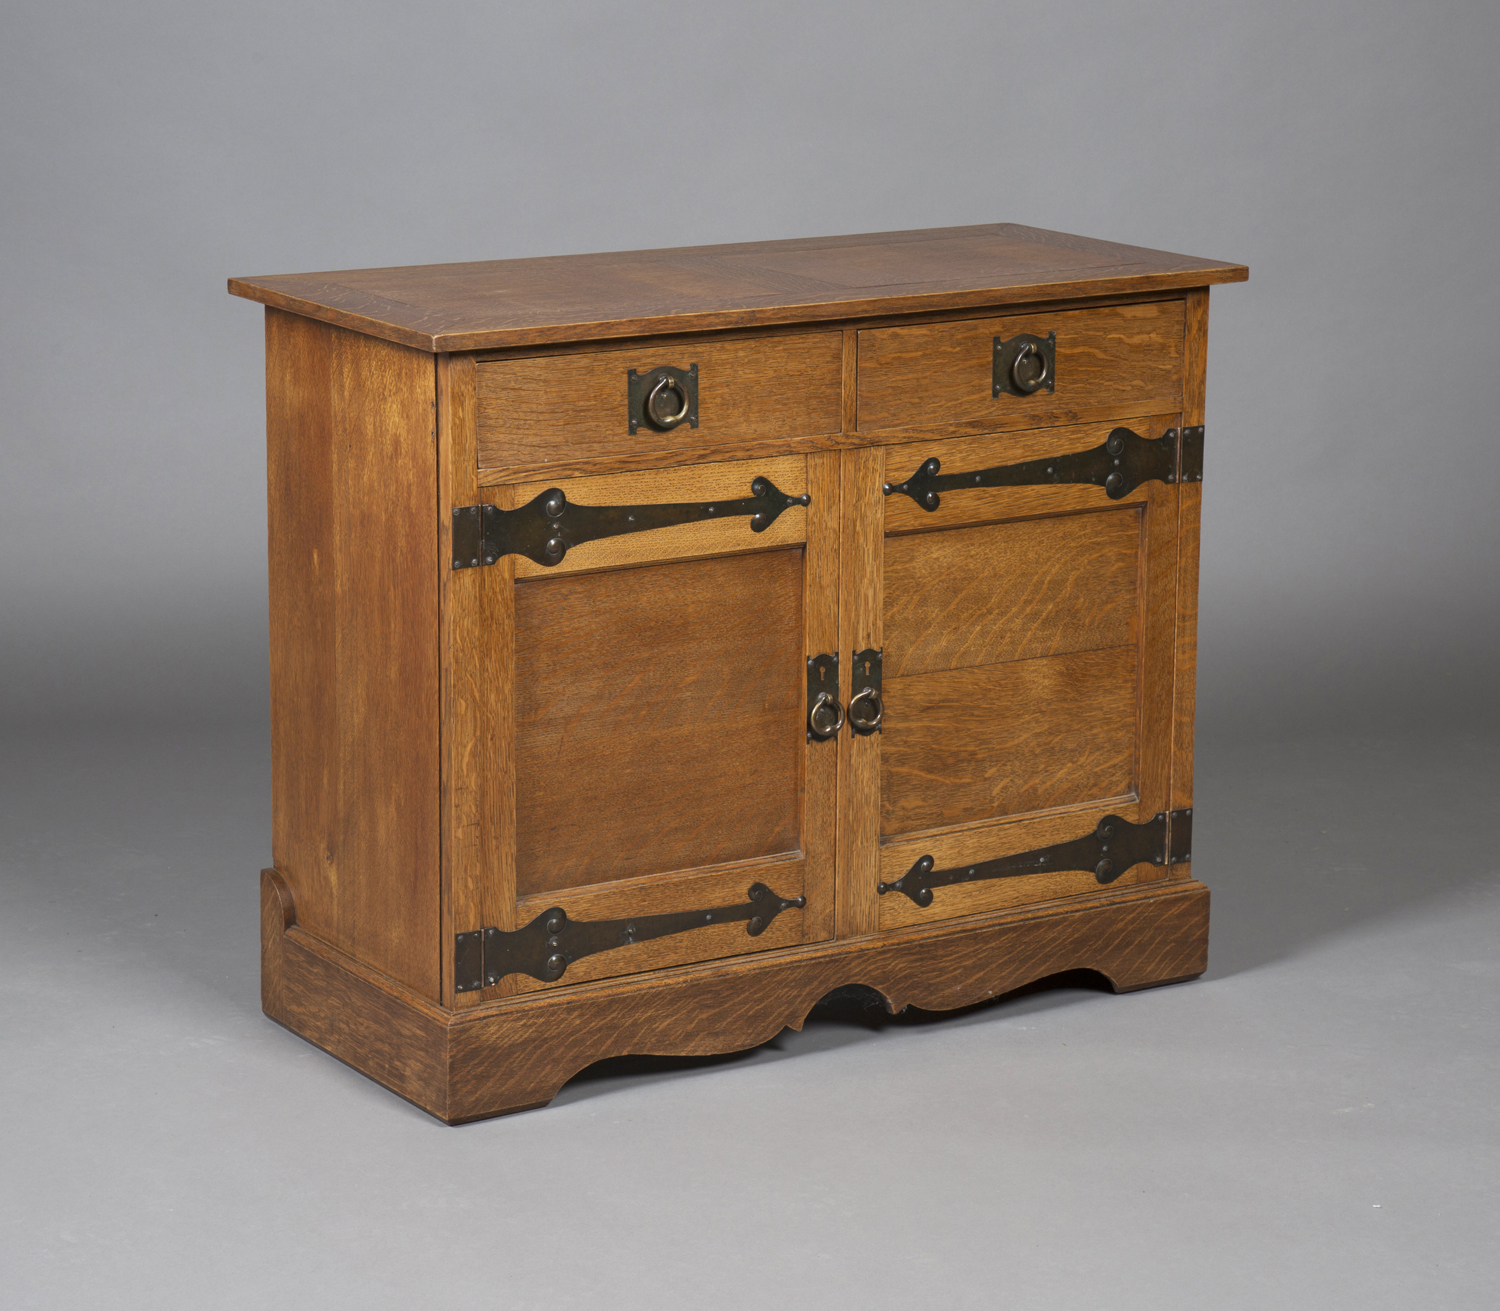 An early 20th century Arts and Crafts oak side cabinet, possibly by the Guild of Handicraft,